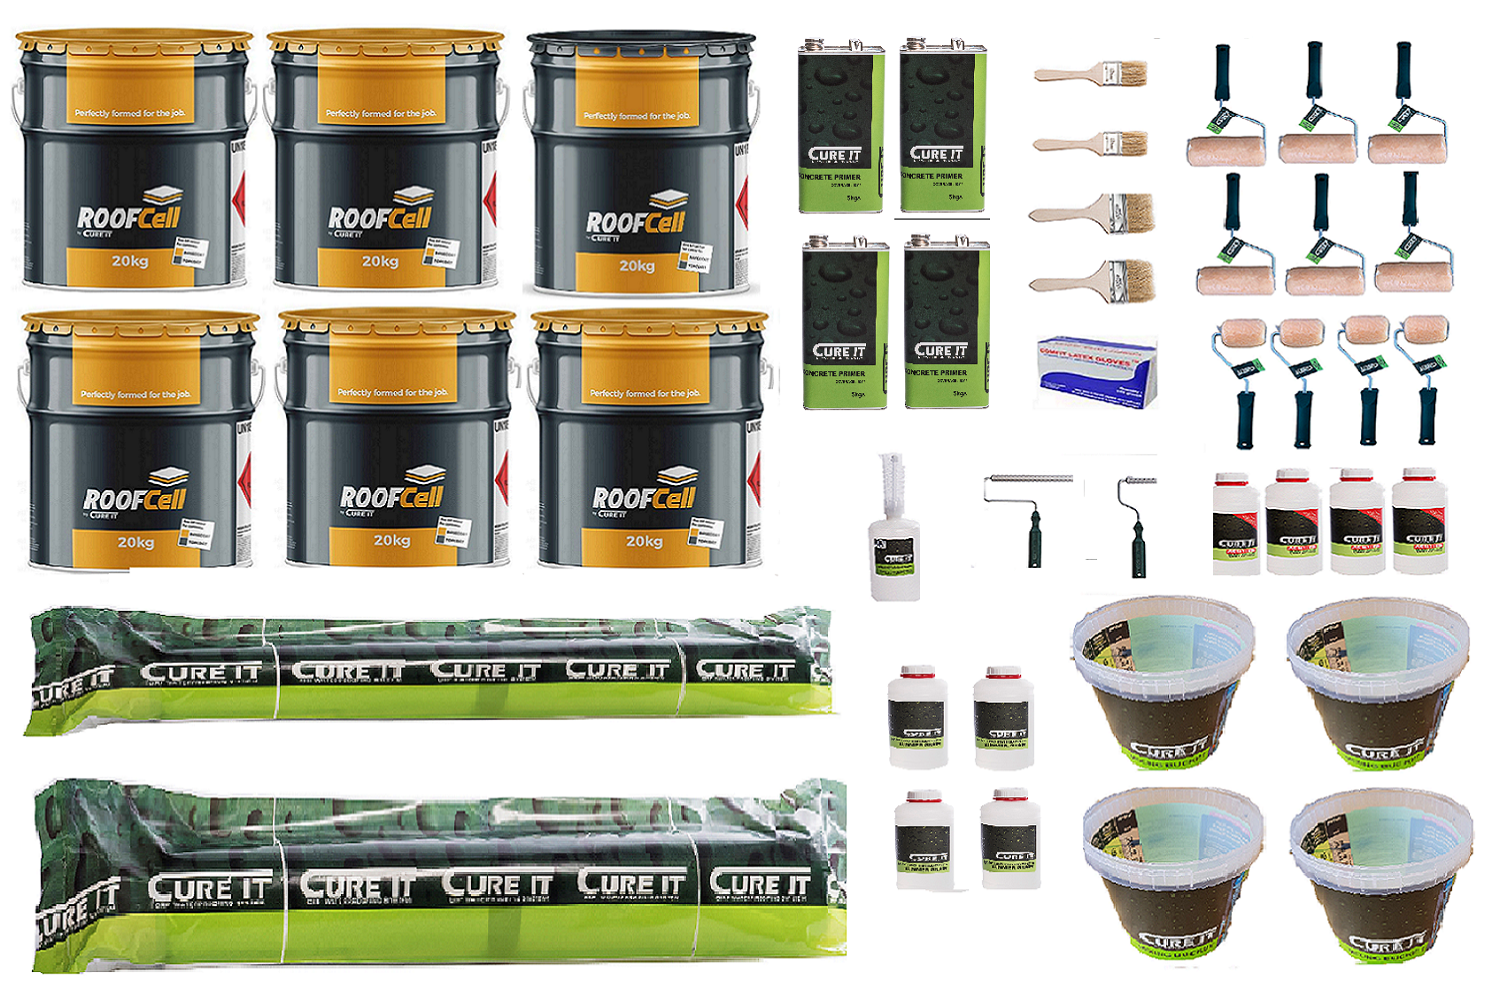 40m² Cure It ROOFCELL Roofing kit For Concrete